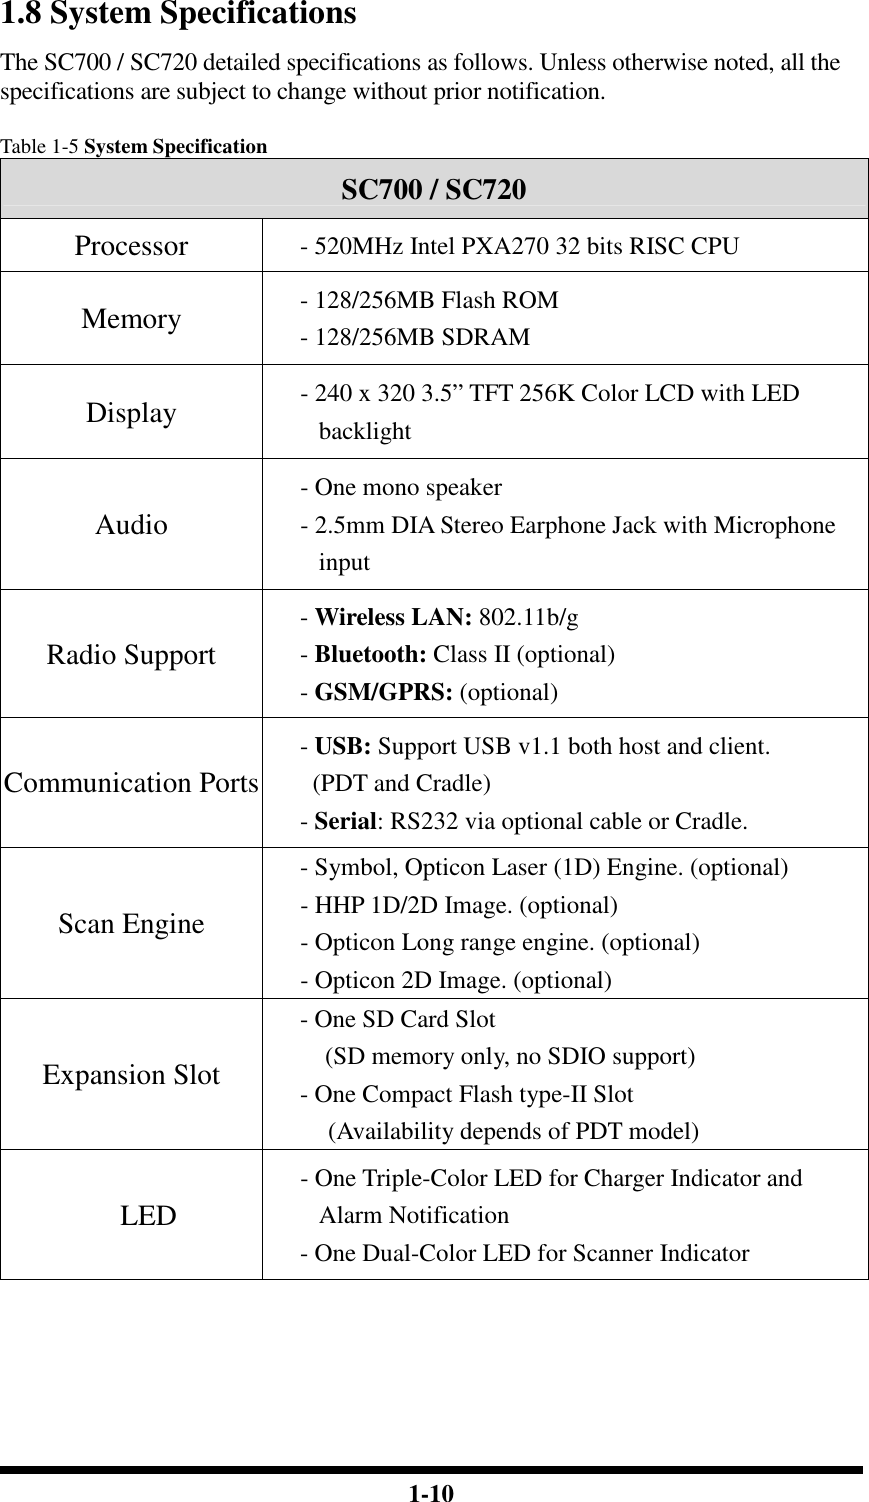  1-10 1.8 System Specifications The SC700 / SC720 detailed specifications as follows. Unless otherwise noted, all the specifications are subject to change without prior notification.  Table 1-5 System Specification SC700 / SC720 Processor - 520MHz Intel PXA270 32 bits RISC CPU Memory - 128/256MB Flash ROM - 128/256MB SDRAM Display - 240 x 320 3.5” TFT 256K Color LCD with LED backlight Audio - One mono speaker - 2.5mm DIA Stereo Earphone Jack with Microphone input Radio Support - Wireless LAN: 802.11b/g - Bluetooth: Class II (optional) - GSM/GPRS: (optional) Communication Ports - USB: Support USB v1.1 both host and client. (PDT and Cradle)   - Serial: RS232 via optional cable or Cradle. Scan Engine - Symbol, Opticon Laser (1D) Engine. (optional) - HHP 1D/2D Image. (optional) - Opticon Long range engine. (optional) - Opticon 2D Image. (optional) Expansion Slot - One SD Card Slot (SD memory only, no SDIO support) - One Compact Flash type-II Slot (Availability depends of PDT model) LED - One Triple-Color LED for Charger Indicator and Alarm Notification - One Dual-Color LED for Scanner Indicator 